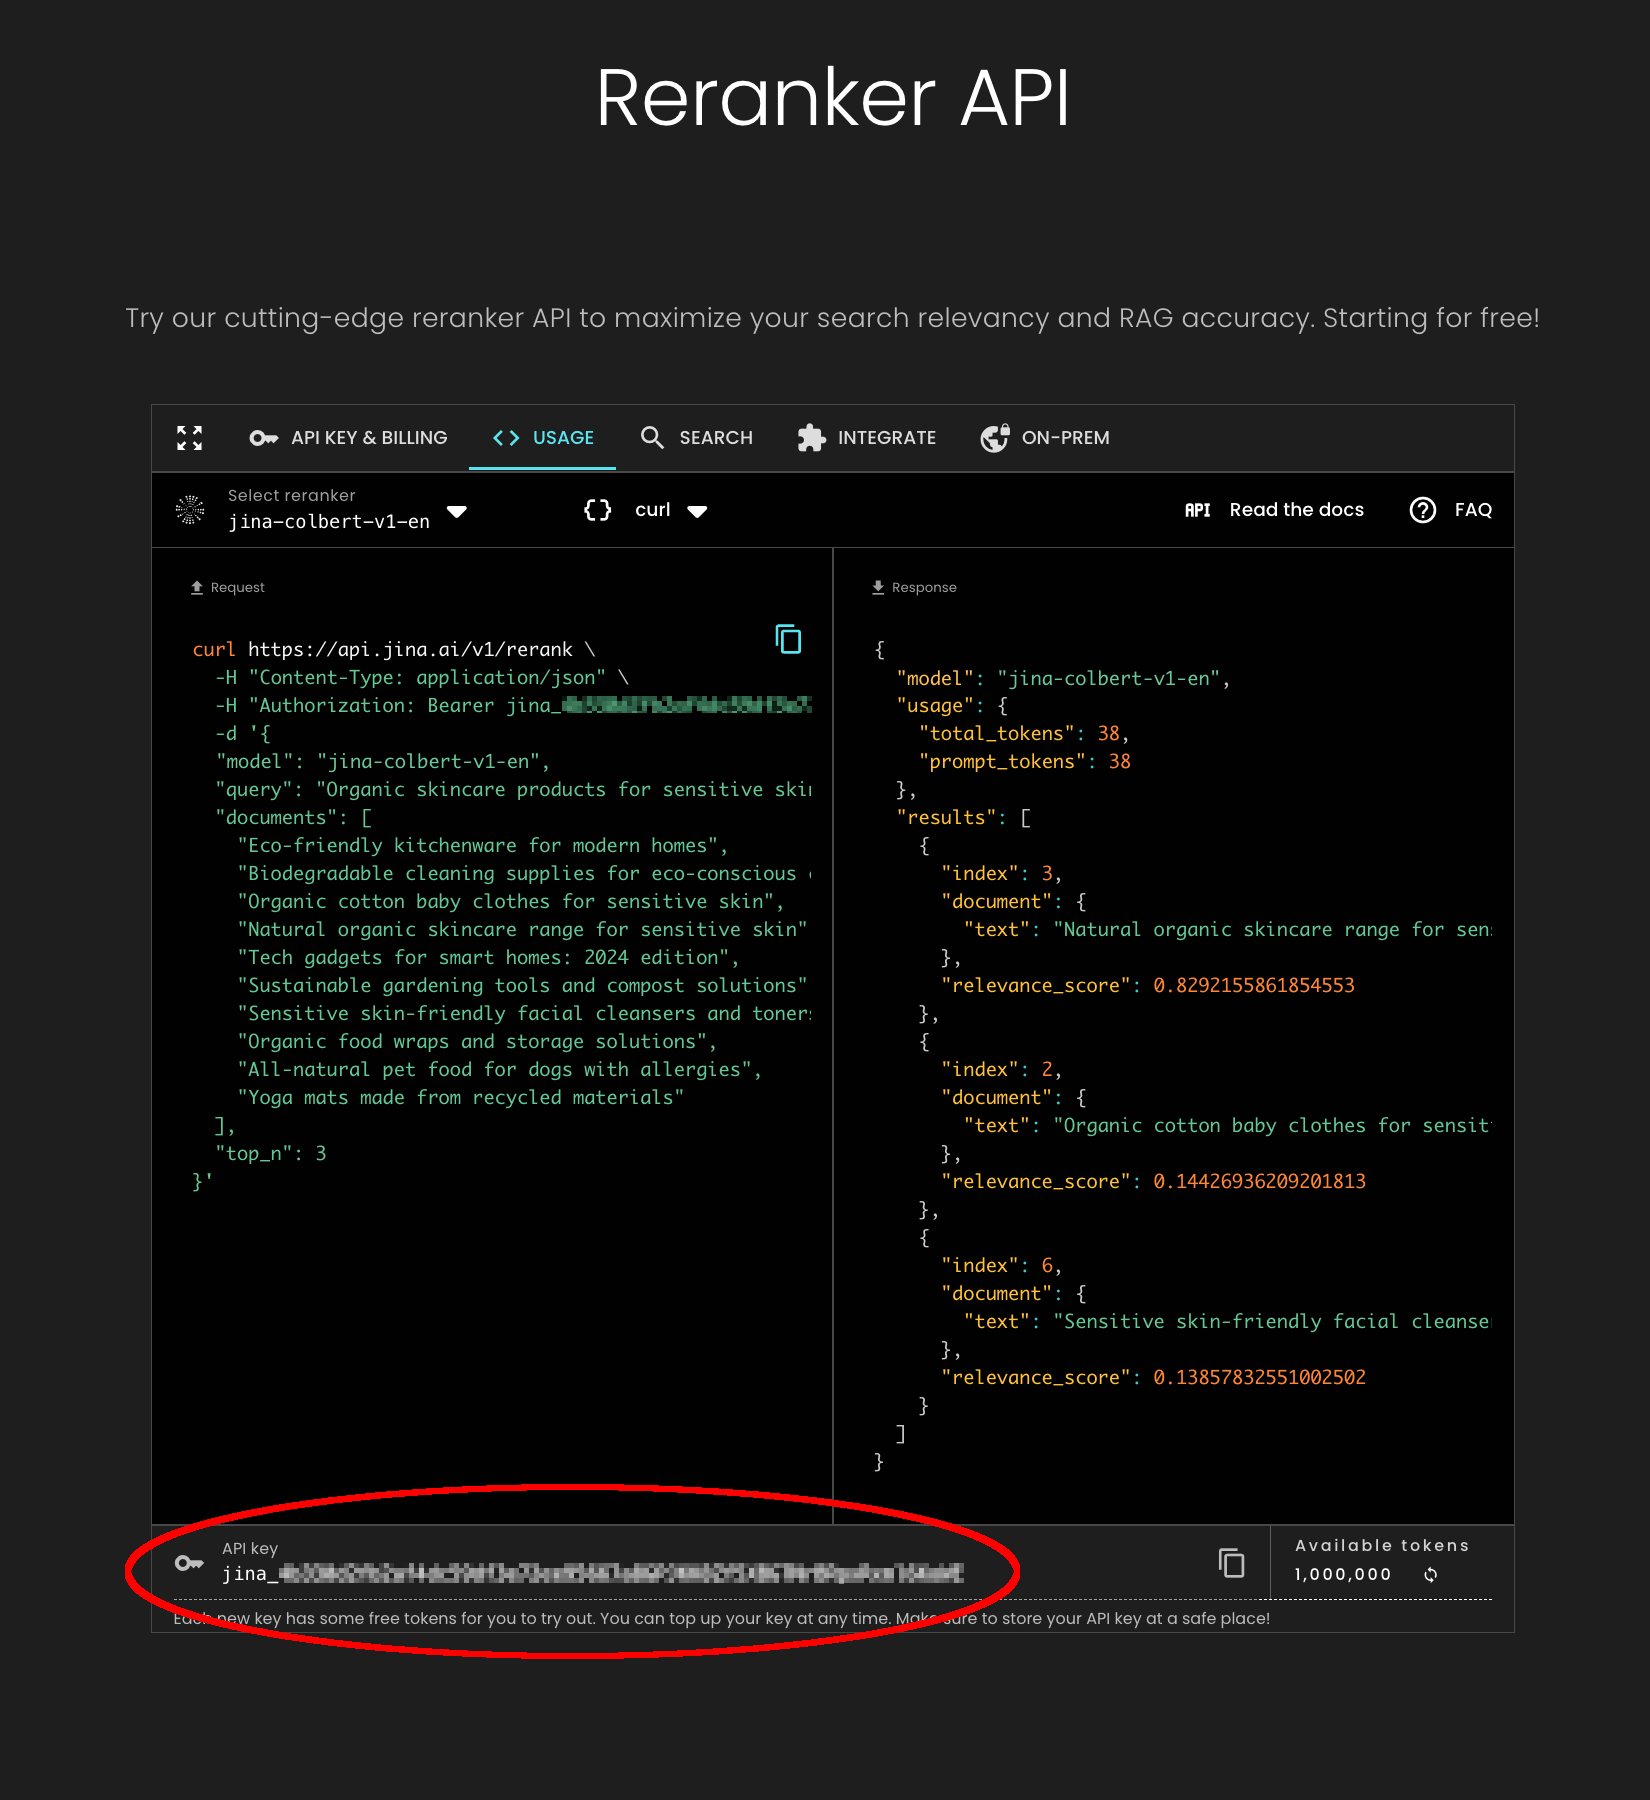 Screenshot of Reranker API's interface with explanatory text and red-highlighted code segment for search optimization.